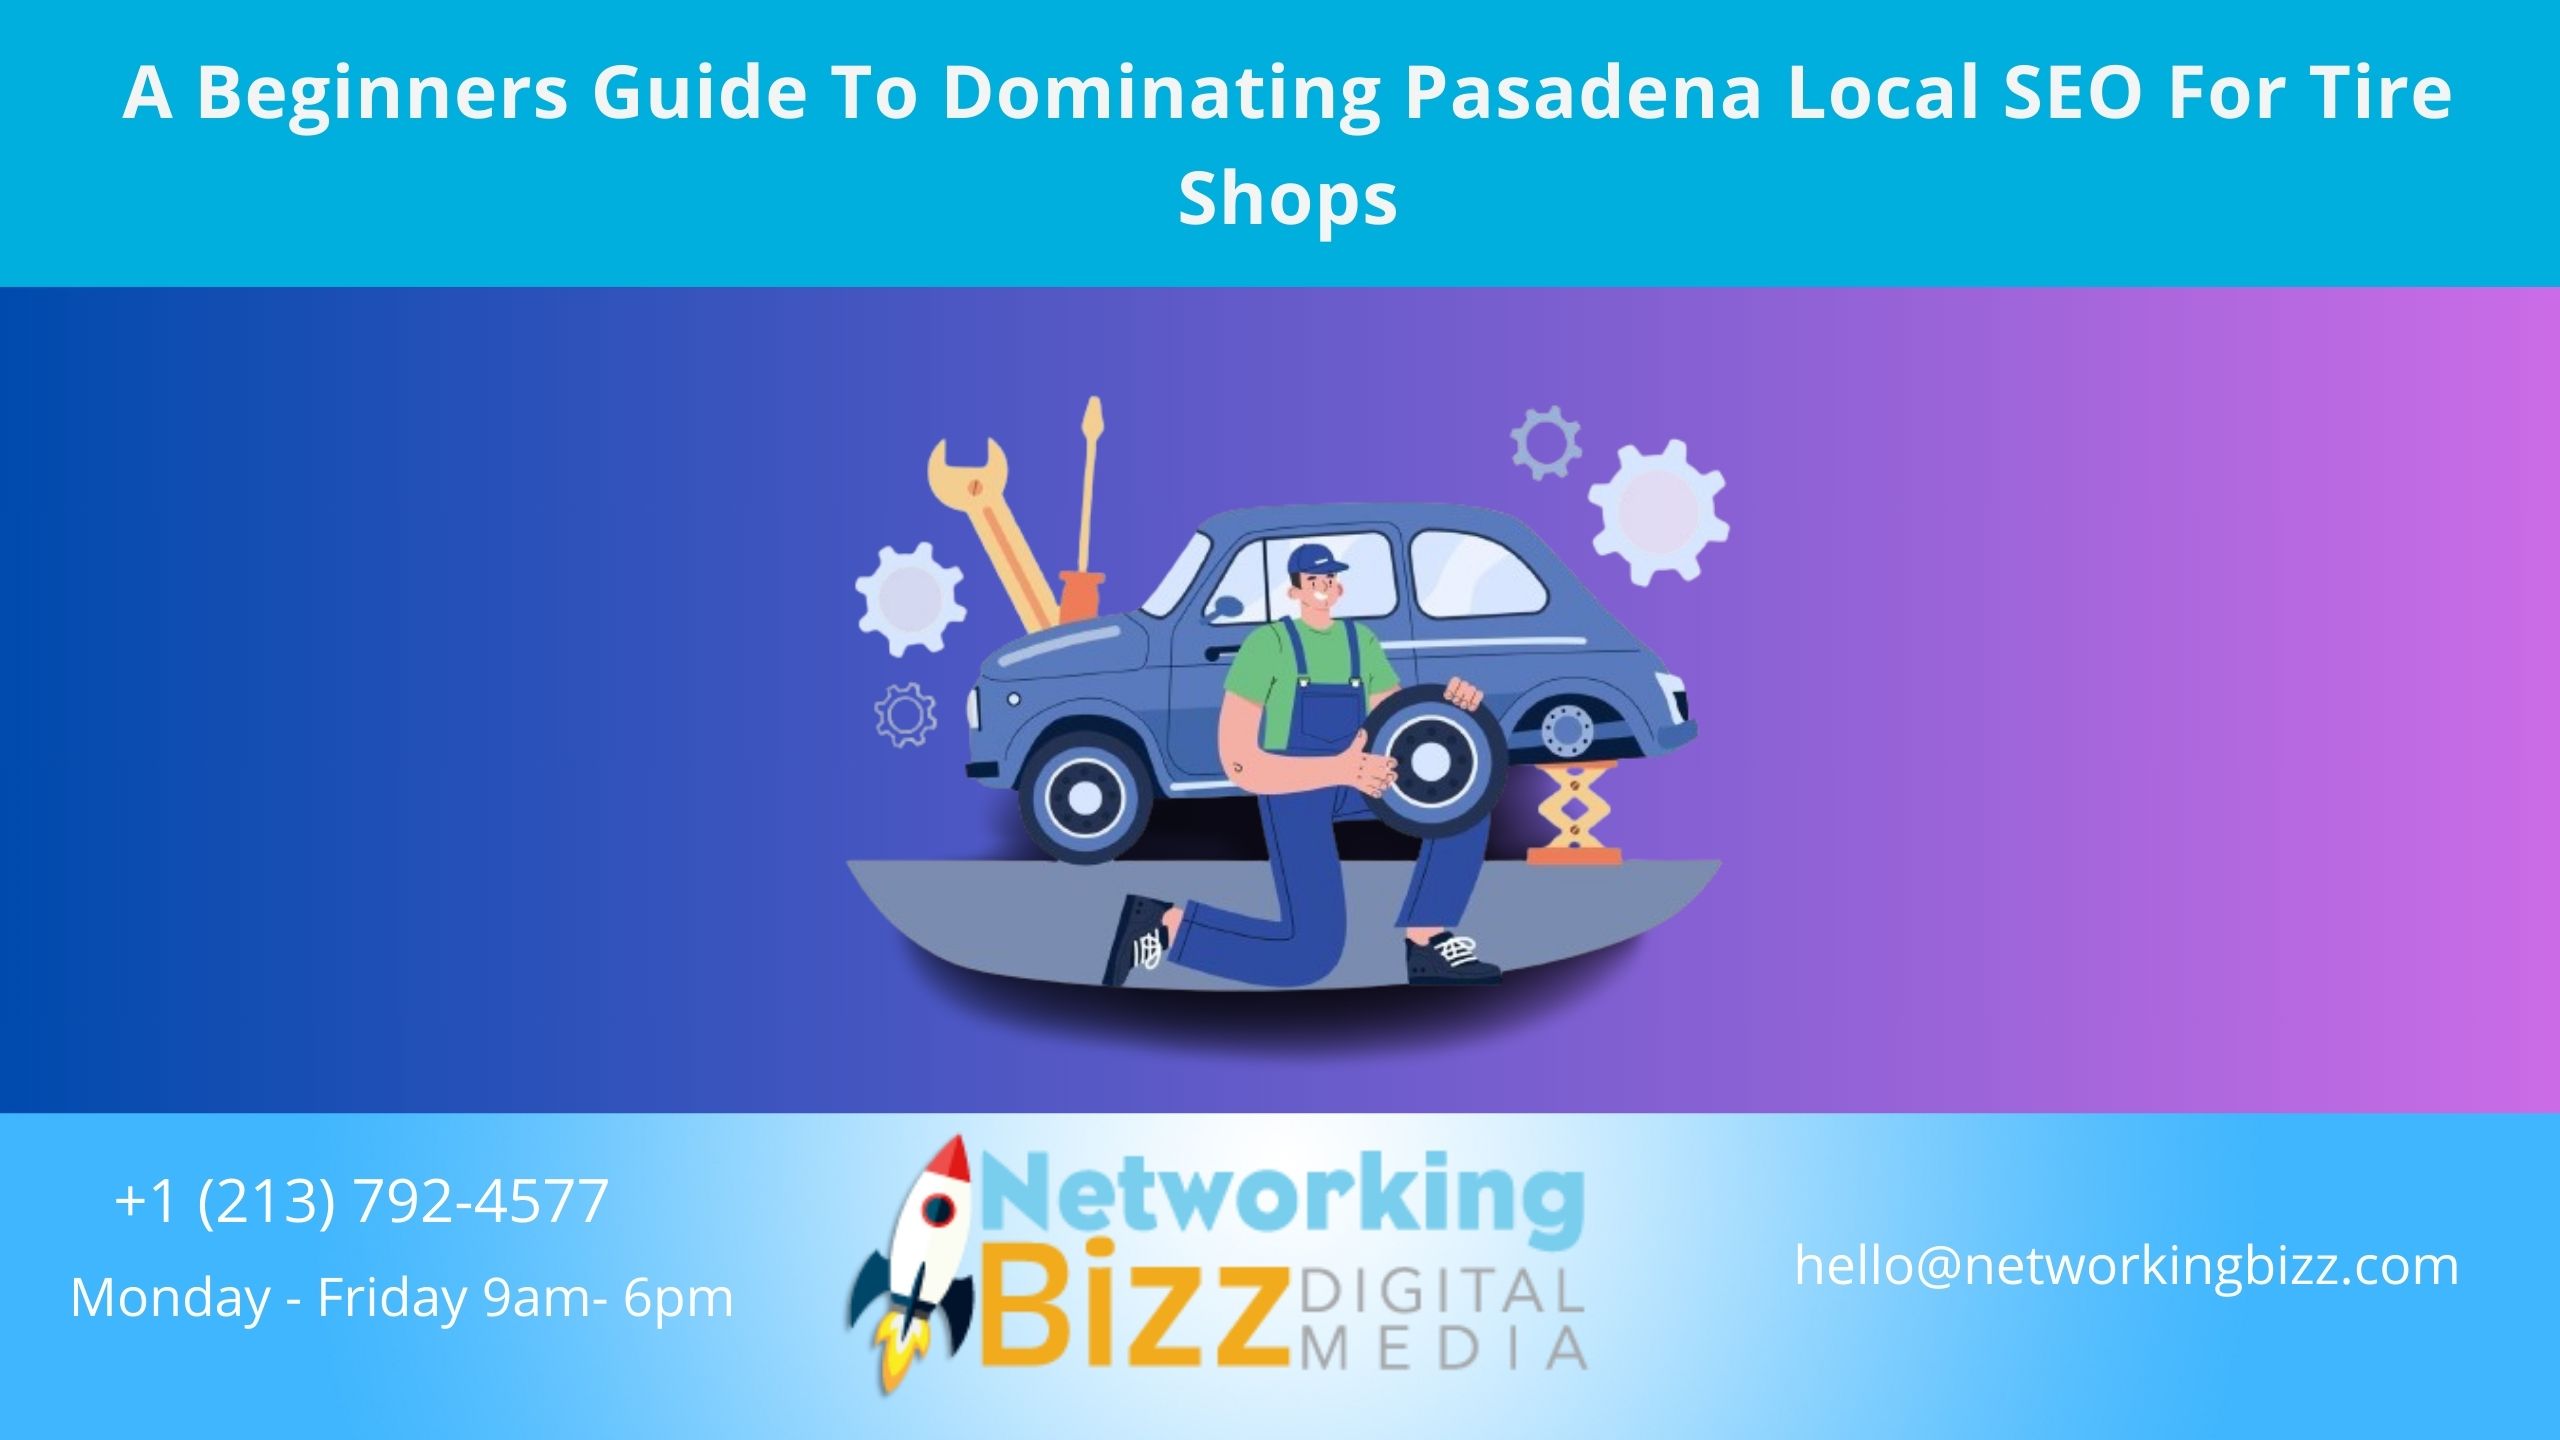 A Beginners Guide To Dominating Pasadena Local SEO For Tire Shops